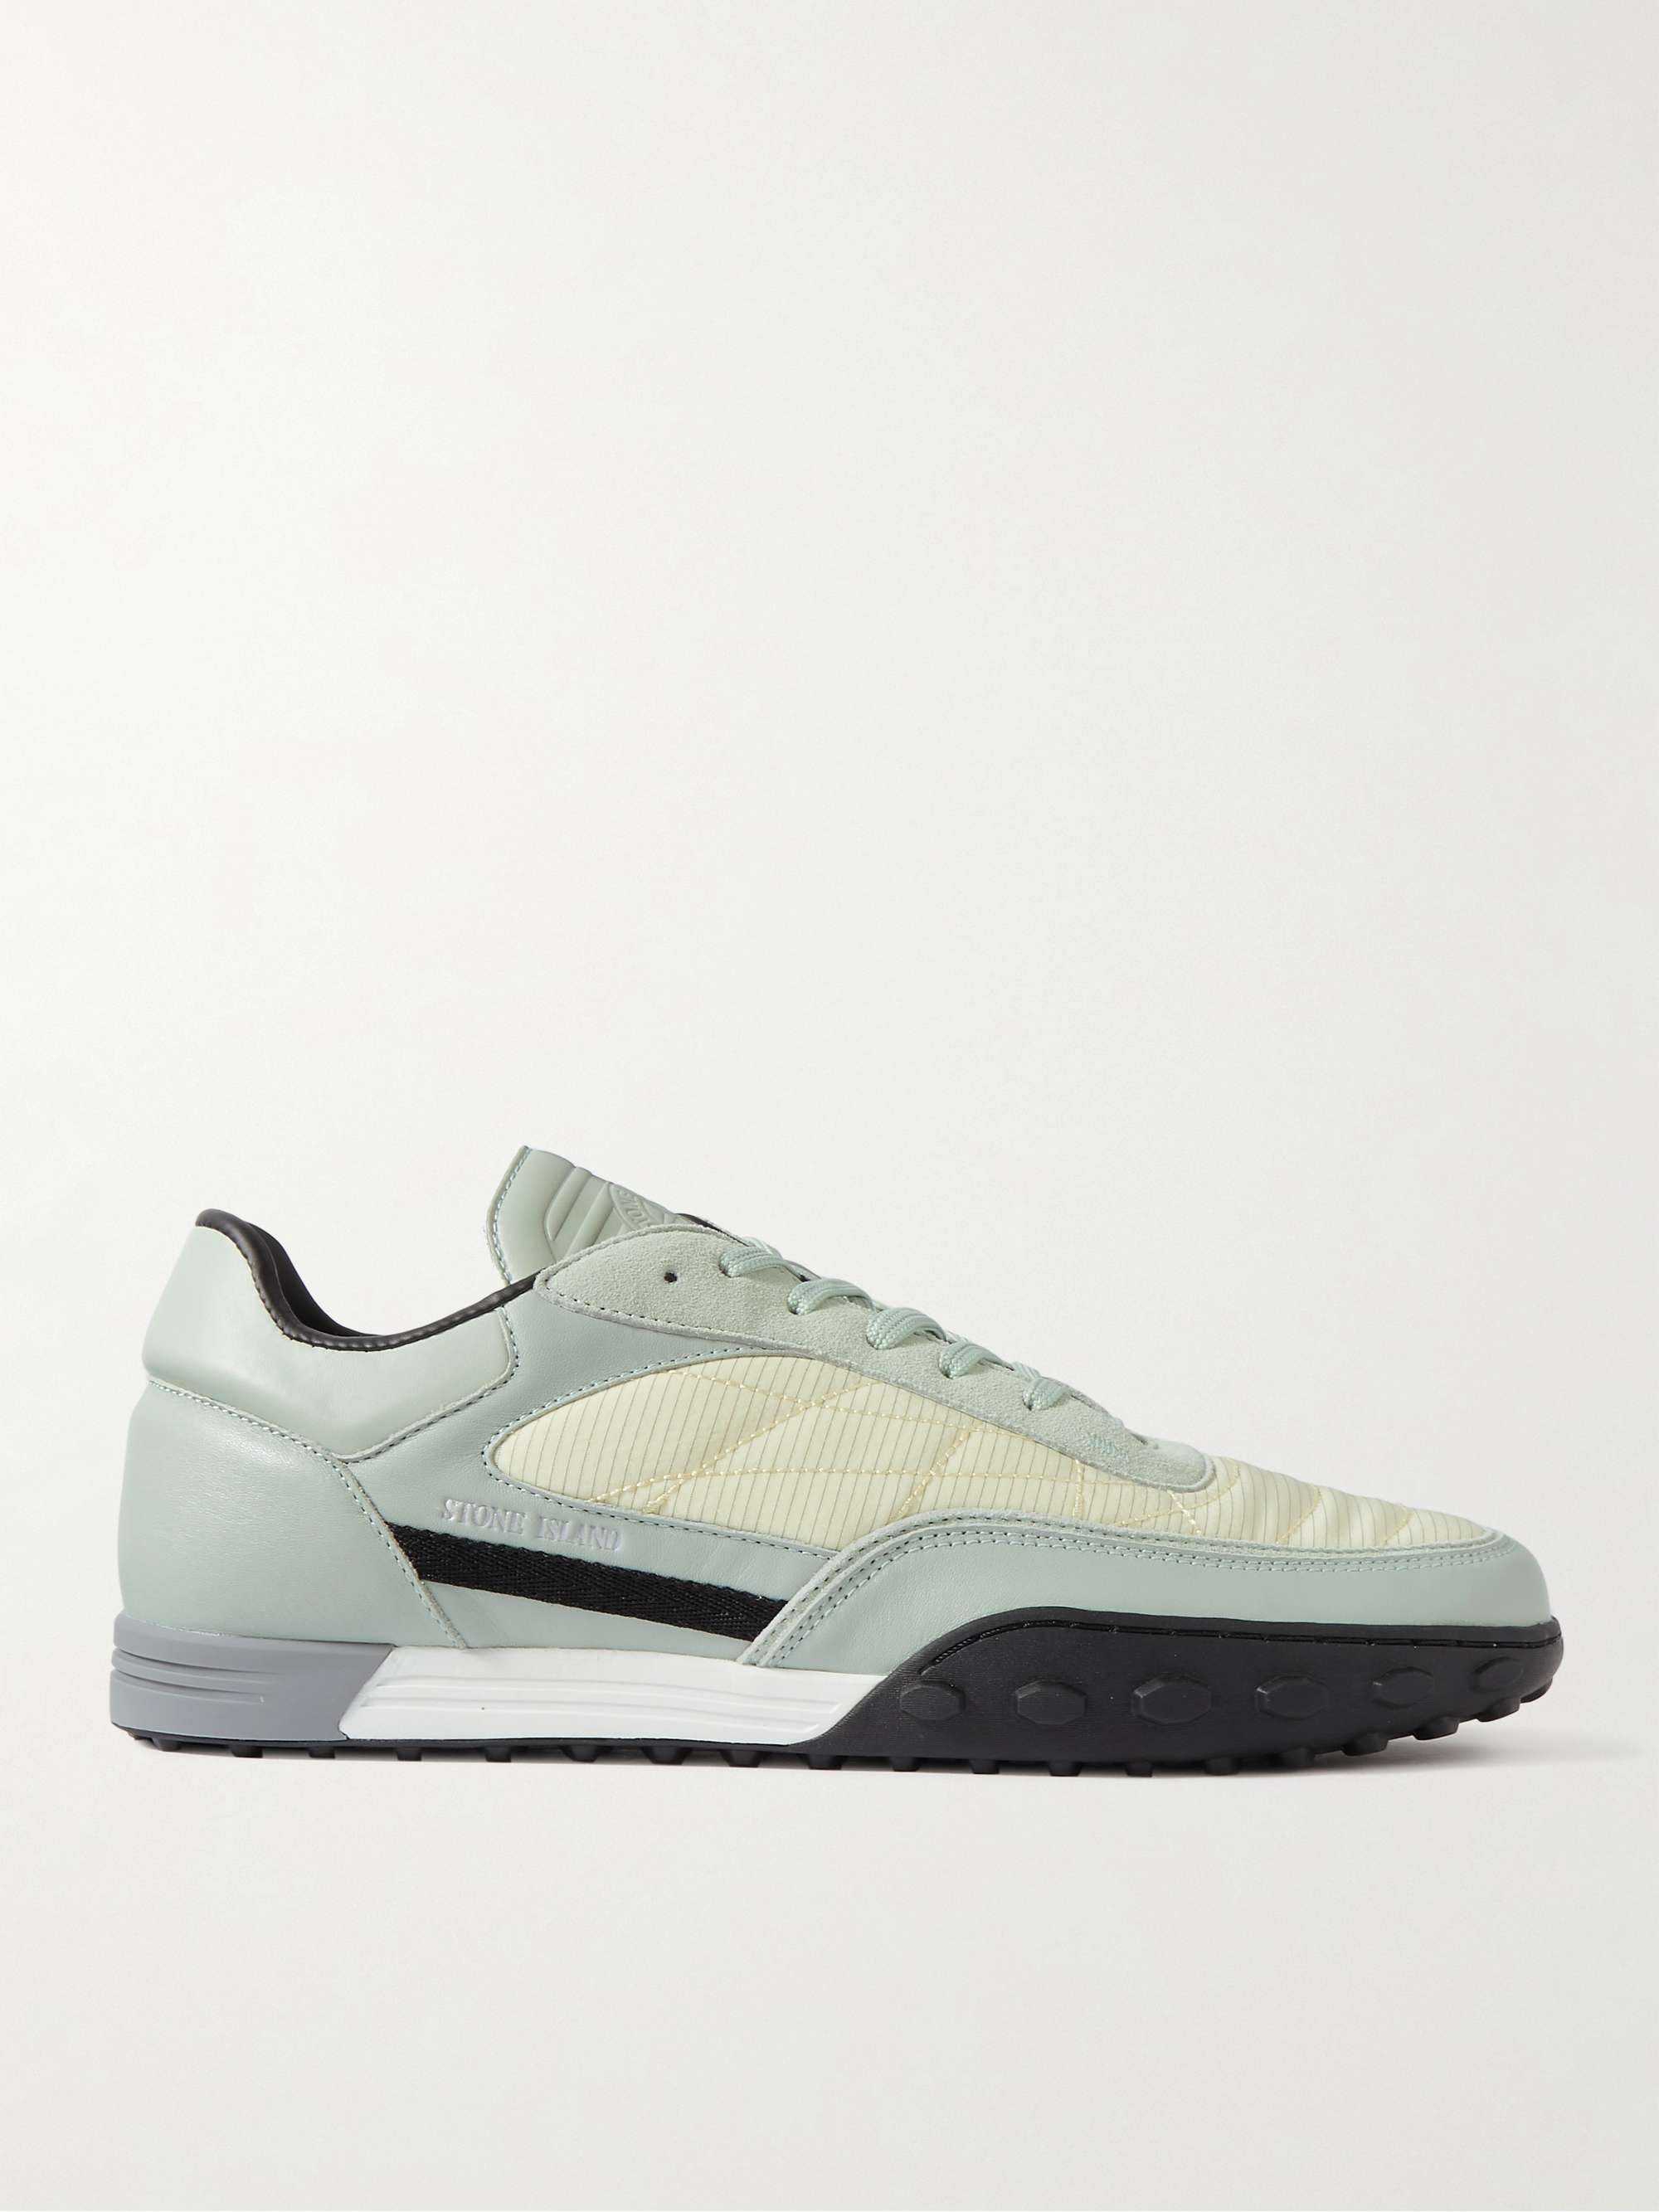 STONE ISLAND Football Leather, Suede and Canvas Sneakers for Men | MR PORTER